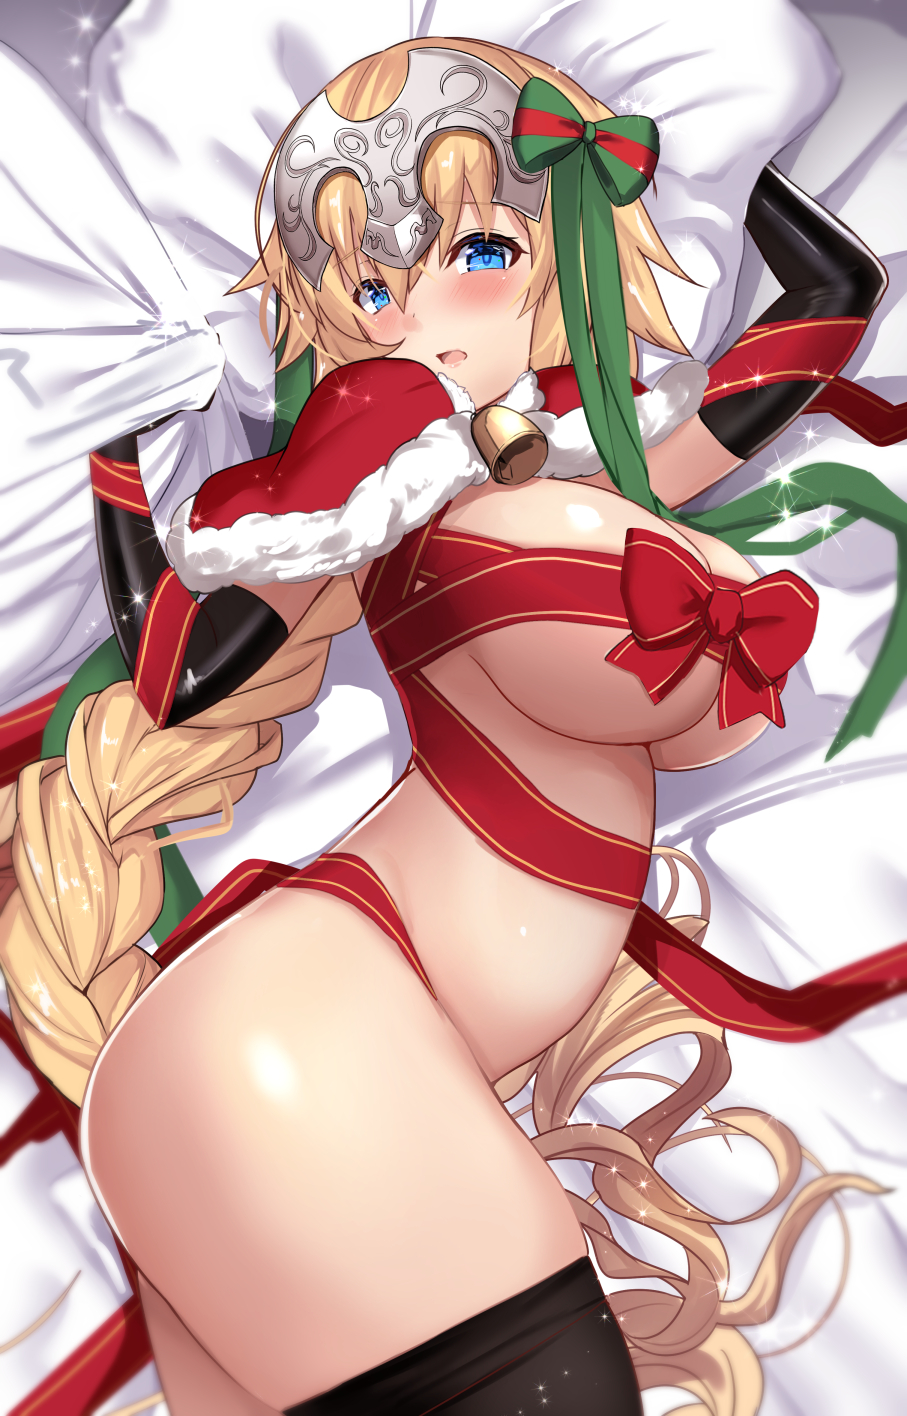 Anime 907x1416 anime anime girls digital art artwork 2D portrait display Untue Fate series Fate/Apocrypha  Jeanne d'Arc (Fate) blonde braids blue eyes blushing in bed thigh-highs big boobs Santa girl lying on side wrapped ribbon red ribbon naked ribbon